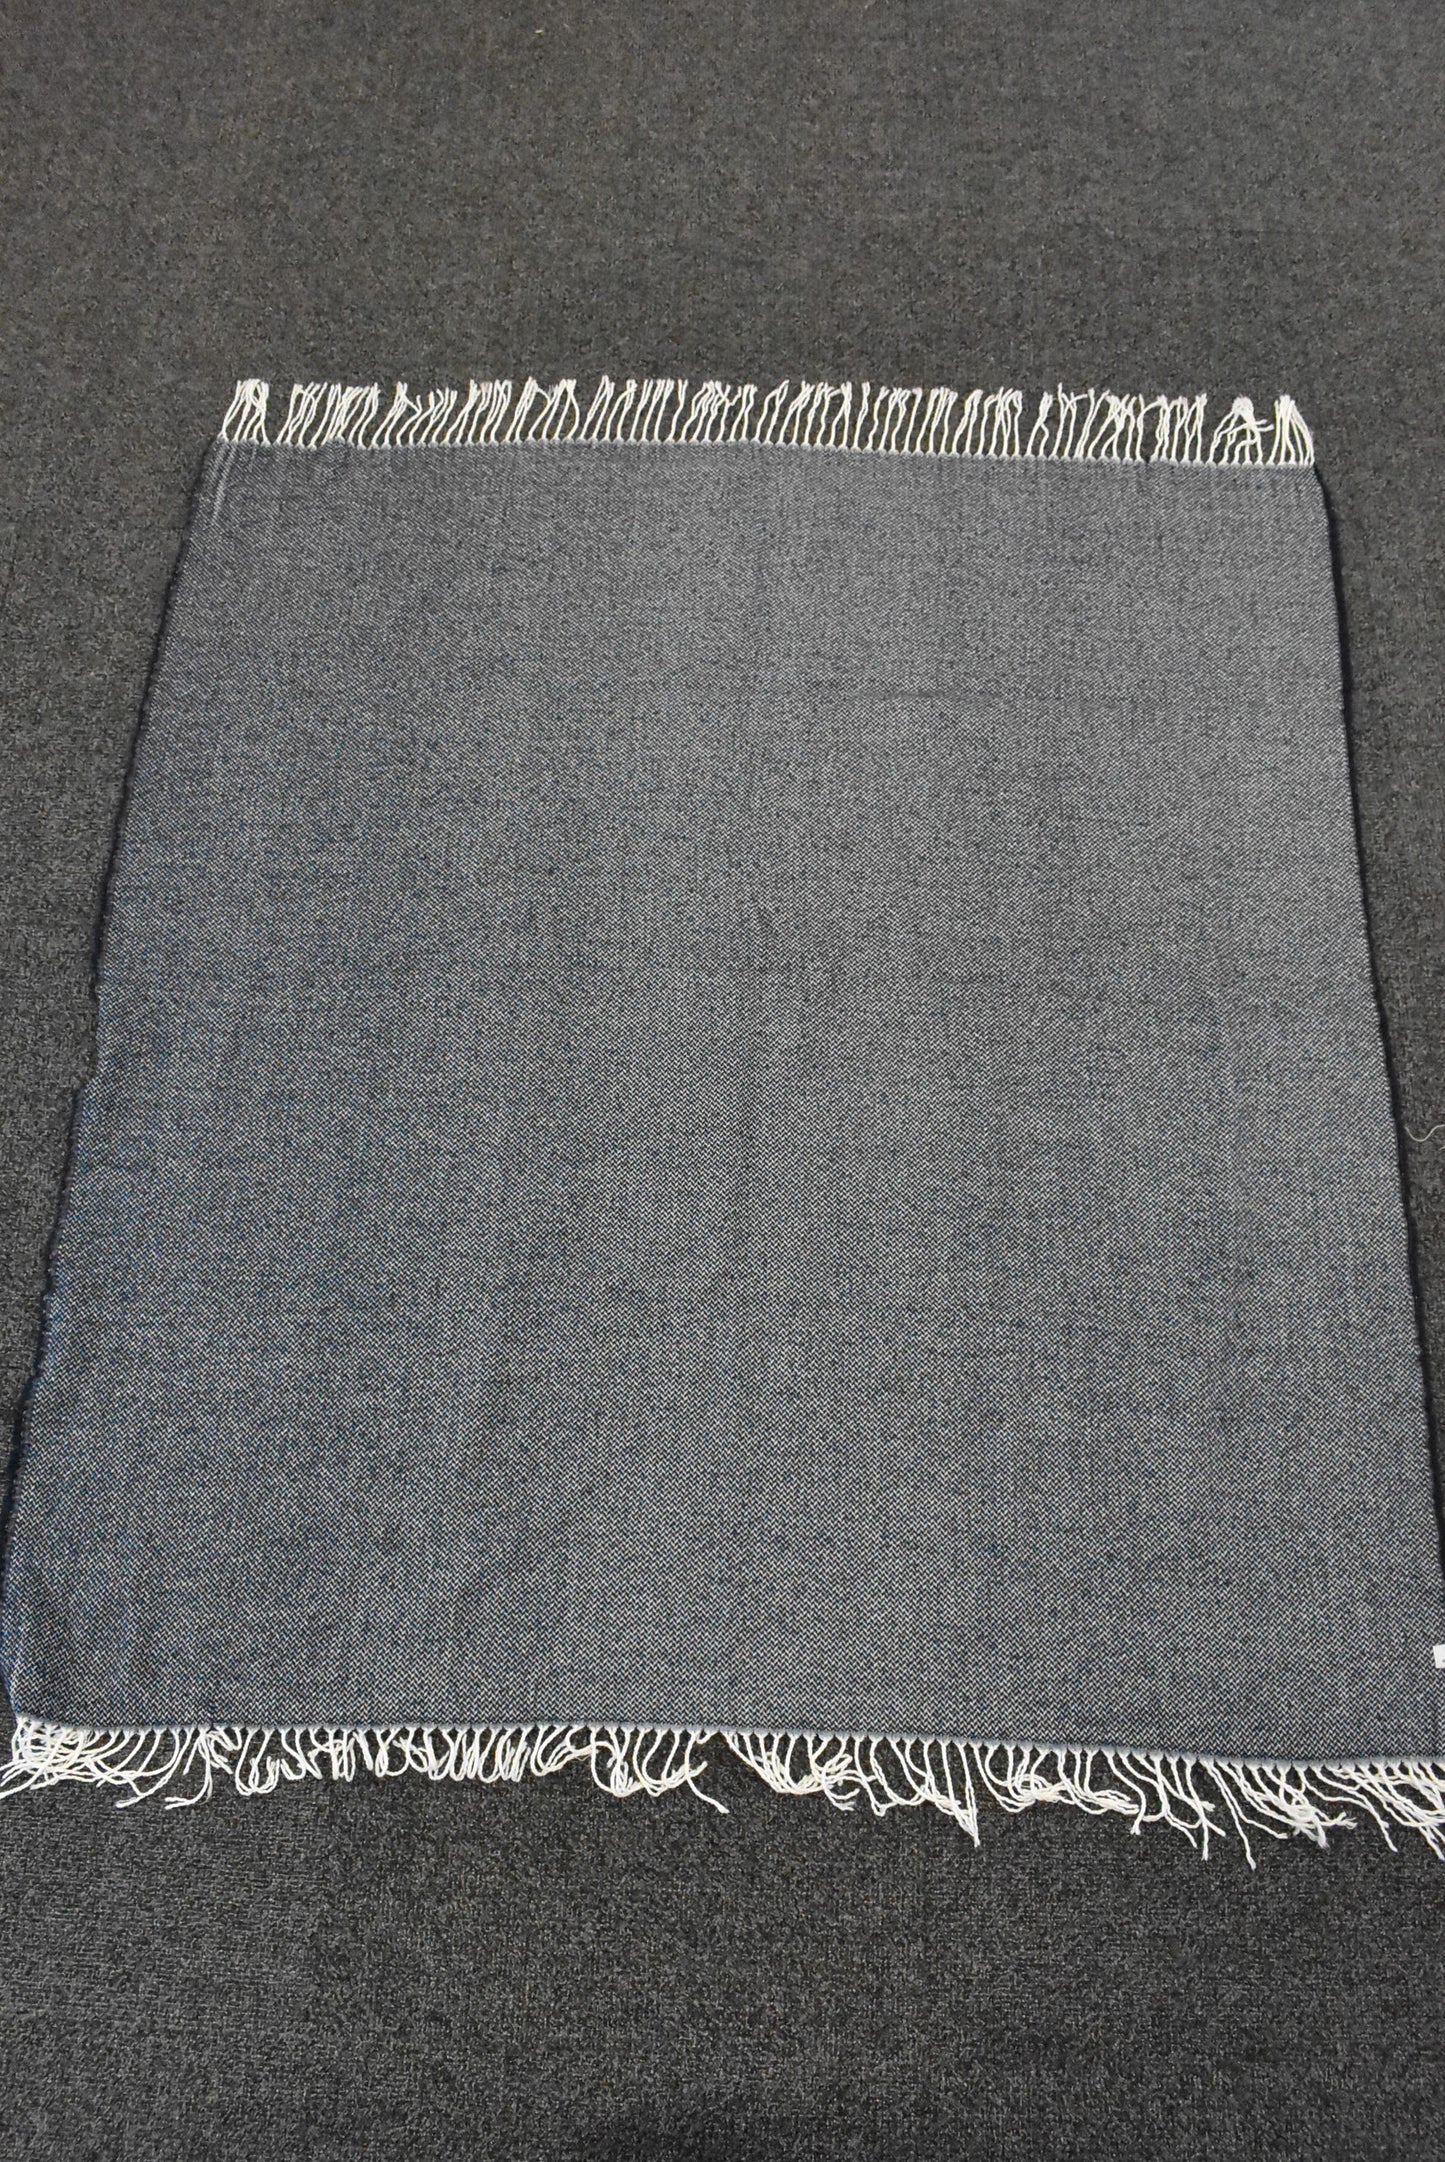 Soft fringed blanket or very large scarf